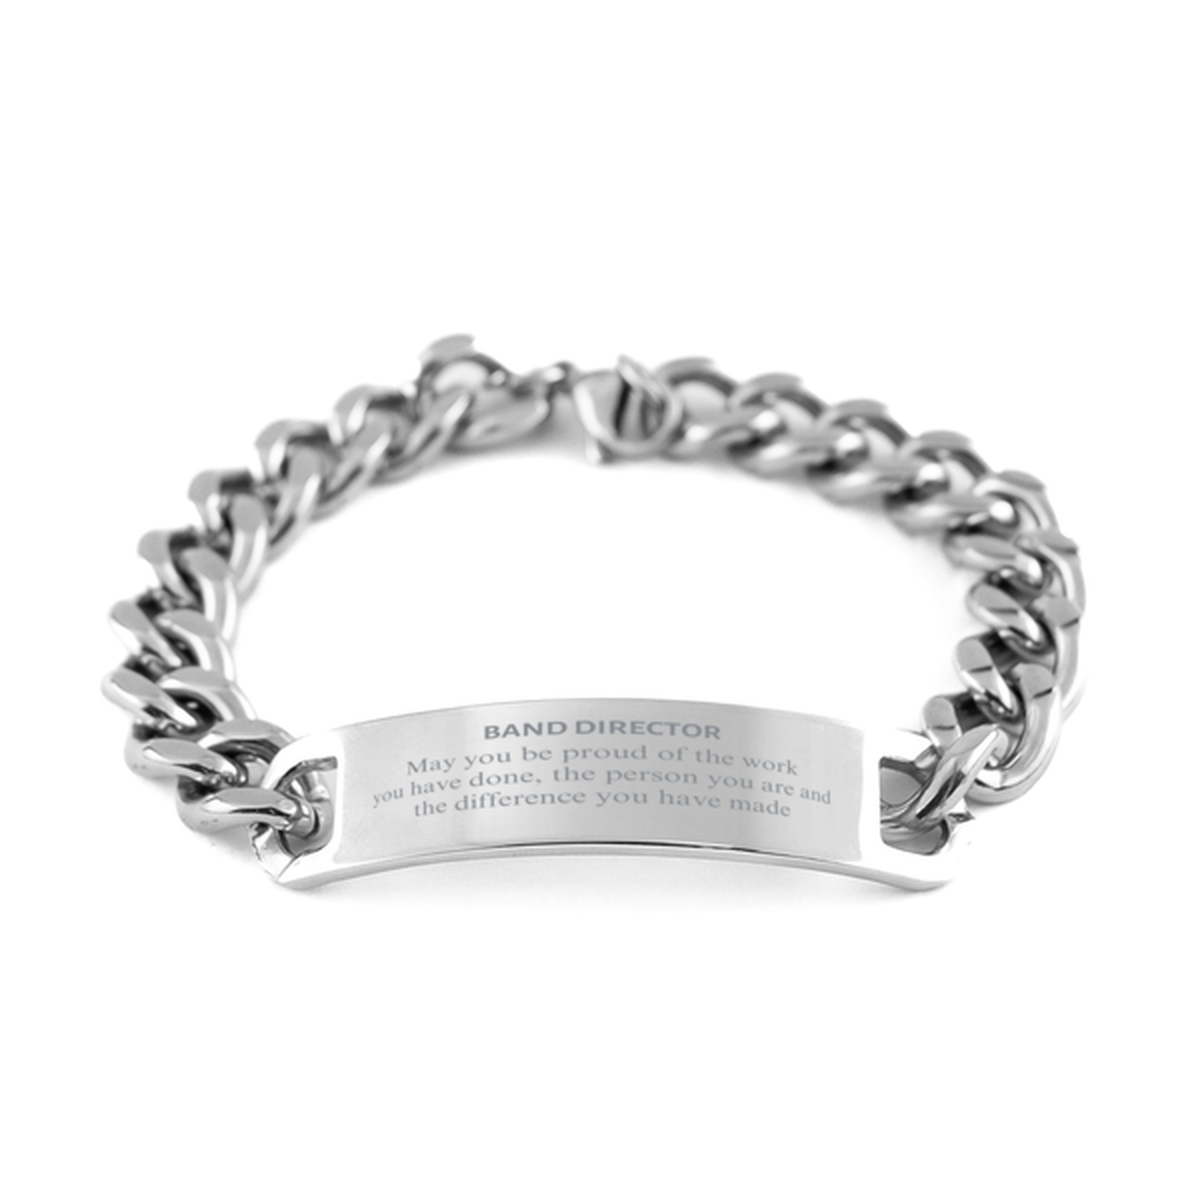 Band Director May you be proud of the work you have done, Retirement Band Director Cuban Chain Stainless Steel Bracelet for Colleague Appreciation Gifts Amazing for Band Director